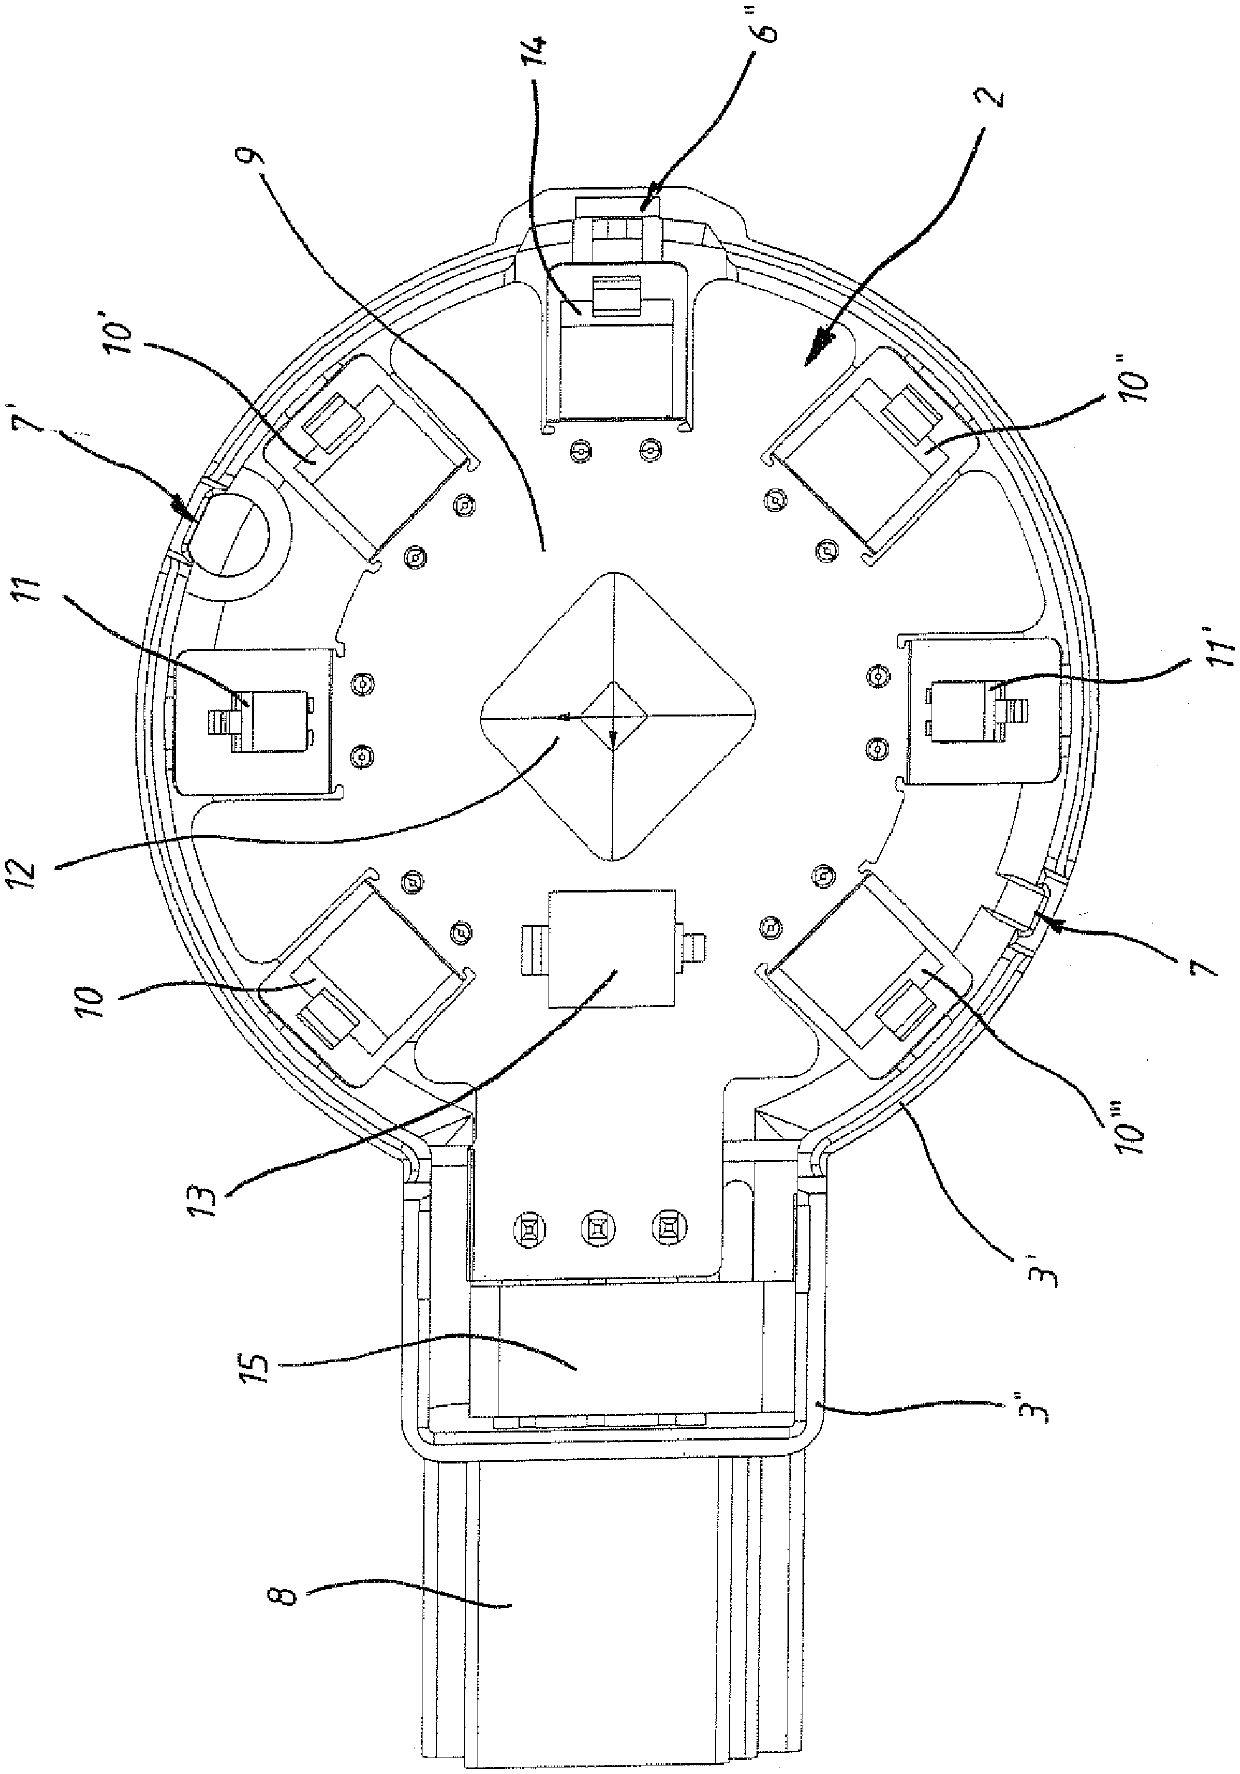 Sensor device for detecting environmental conditions